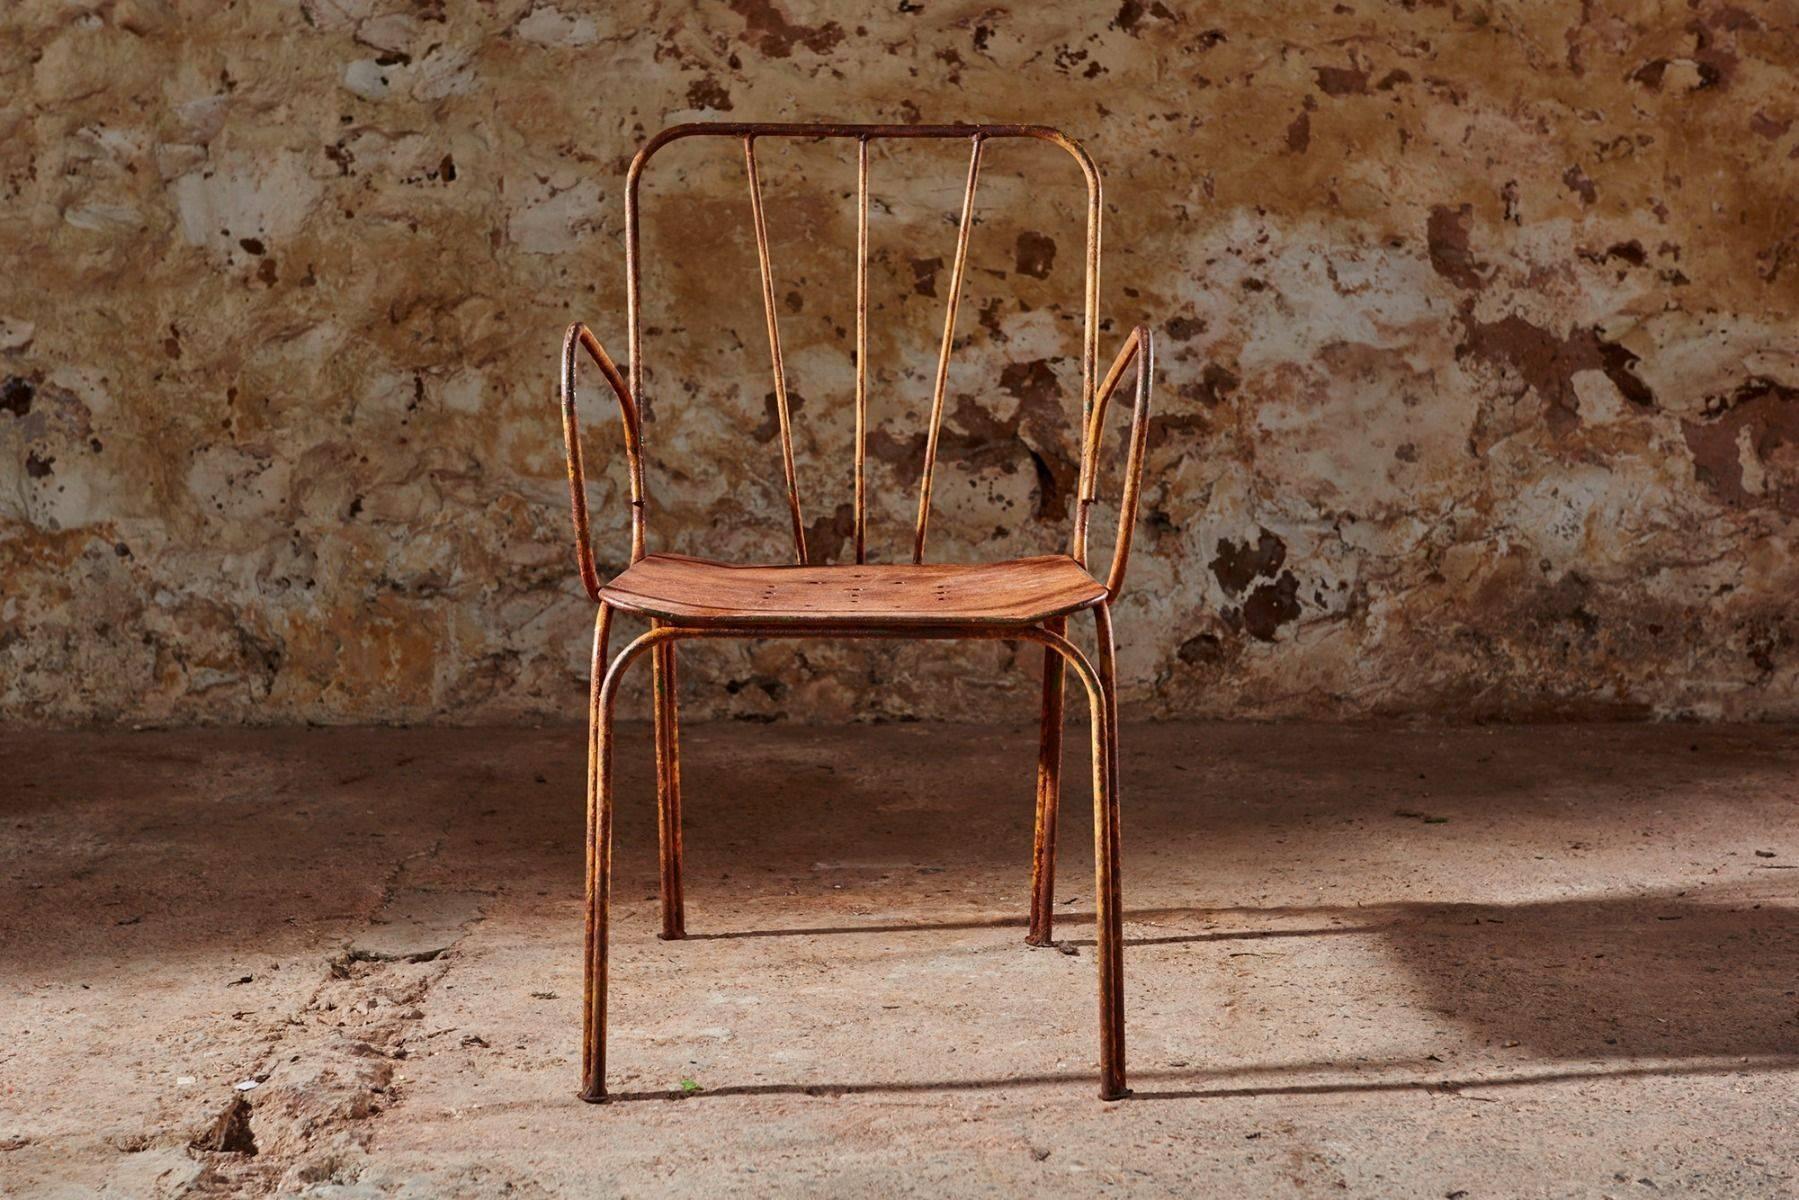 A set of six 1940s garden chairs in the style of Ernest Race. These six wrought iron chairs are in excellent condition, and have an interesting hazelnut brown patina showing remnants of an ochre paint finish.

The chairs have the simple lines